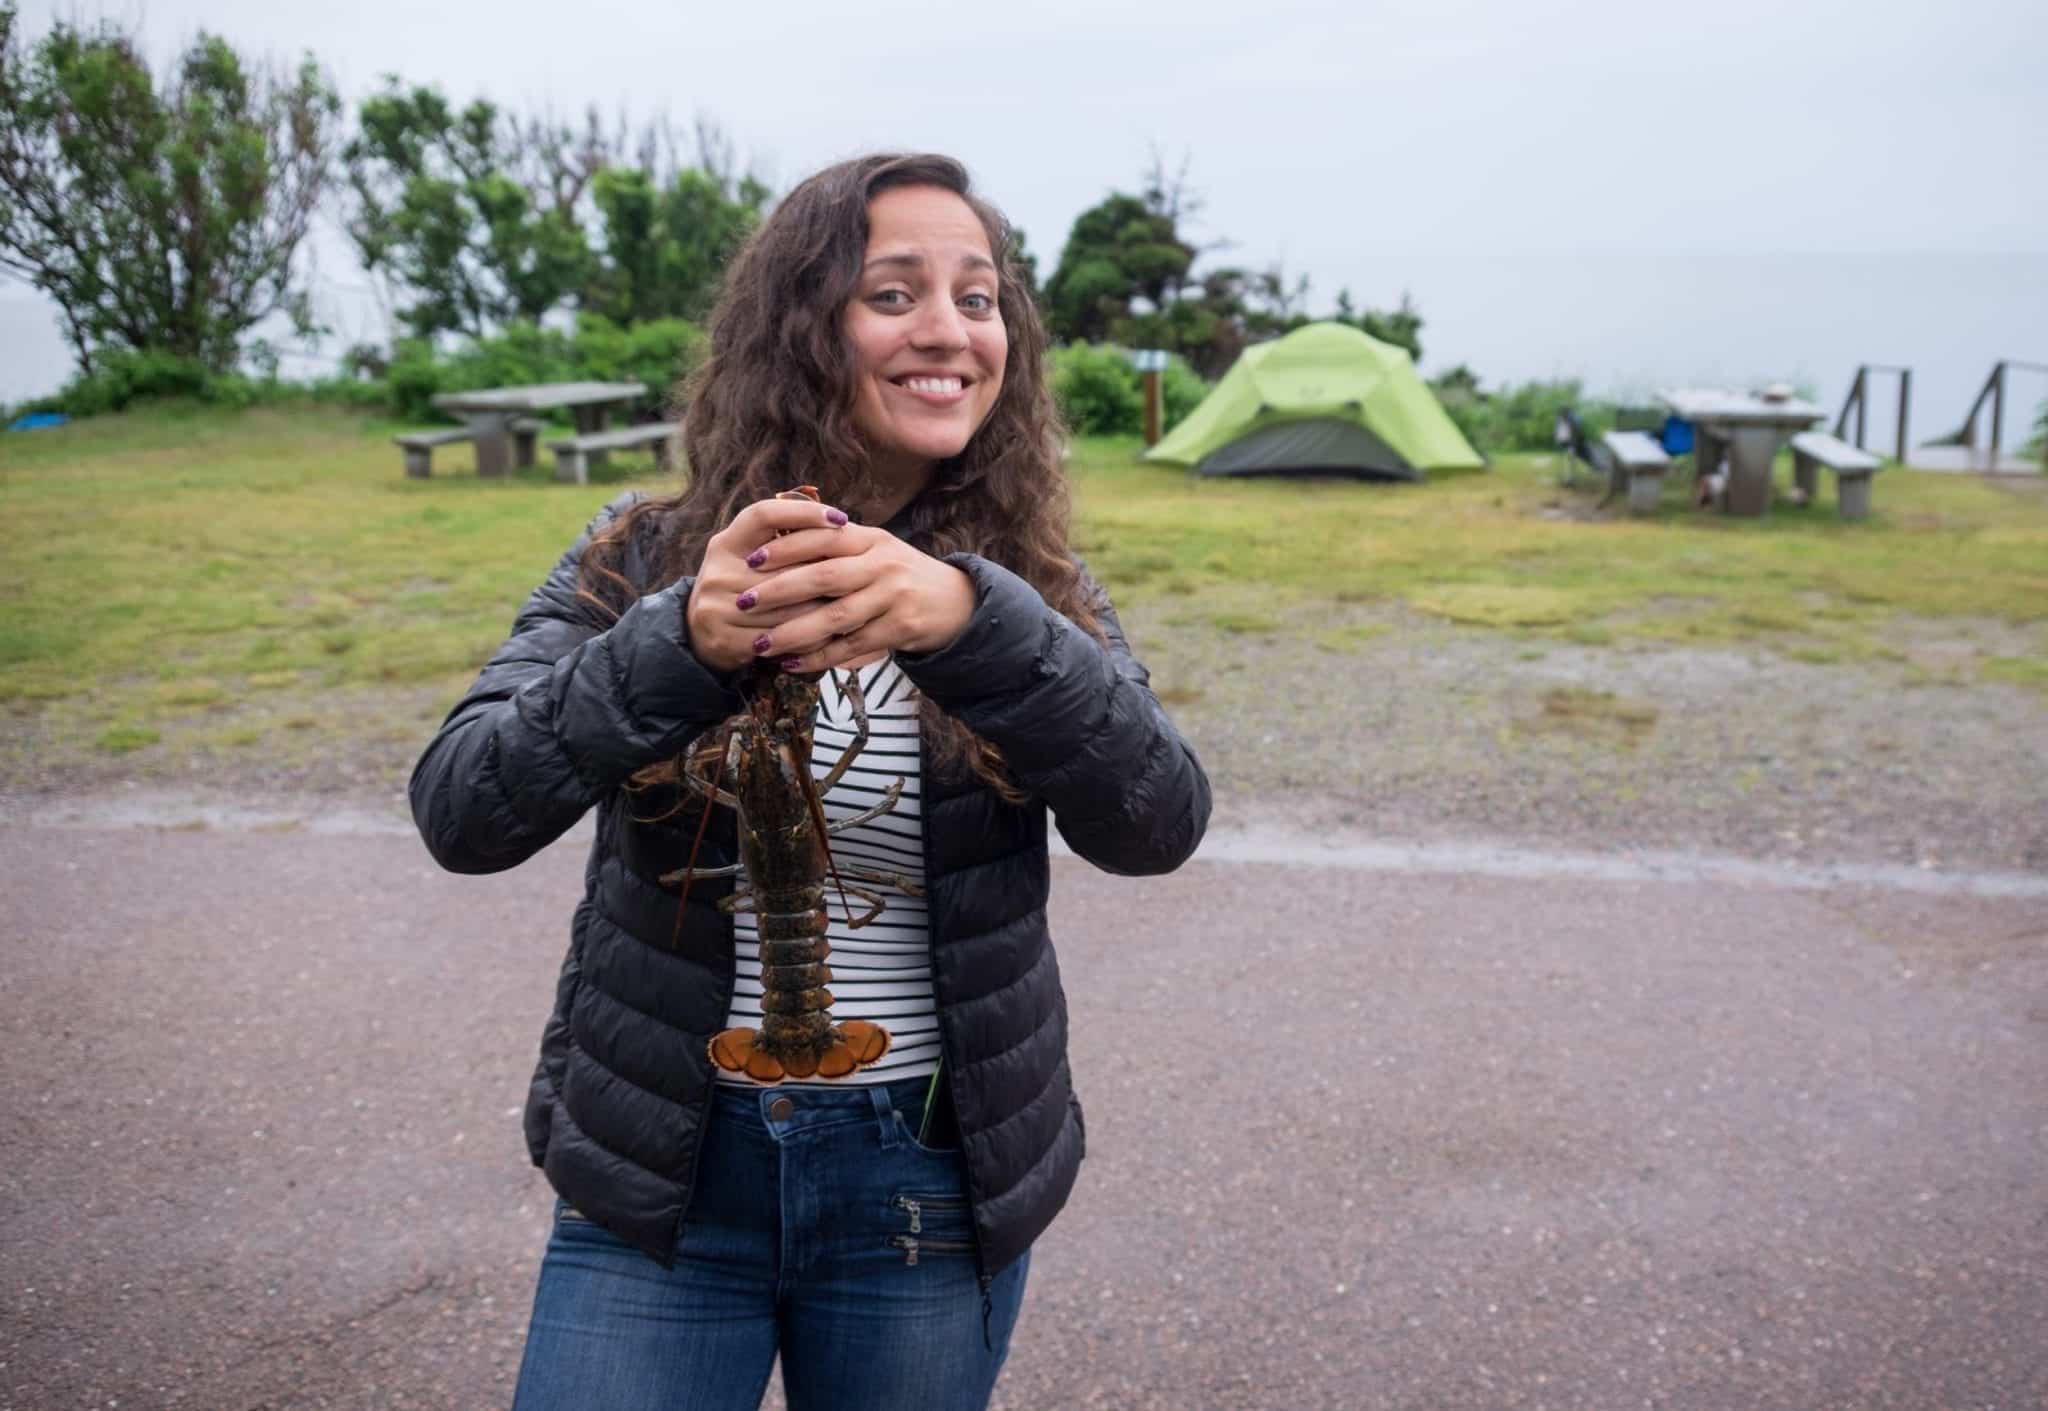 Kate holds a live lobster by the claws and smiles nervously. Tents are behind her.